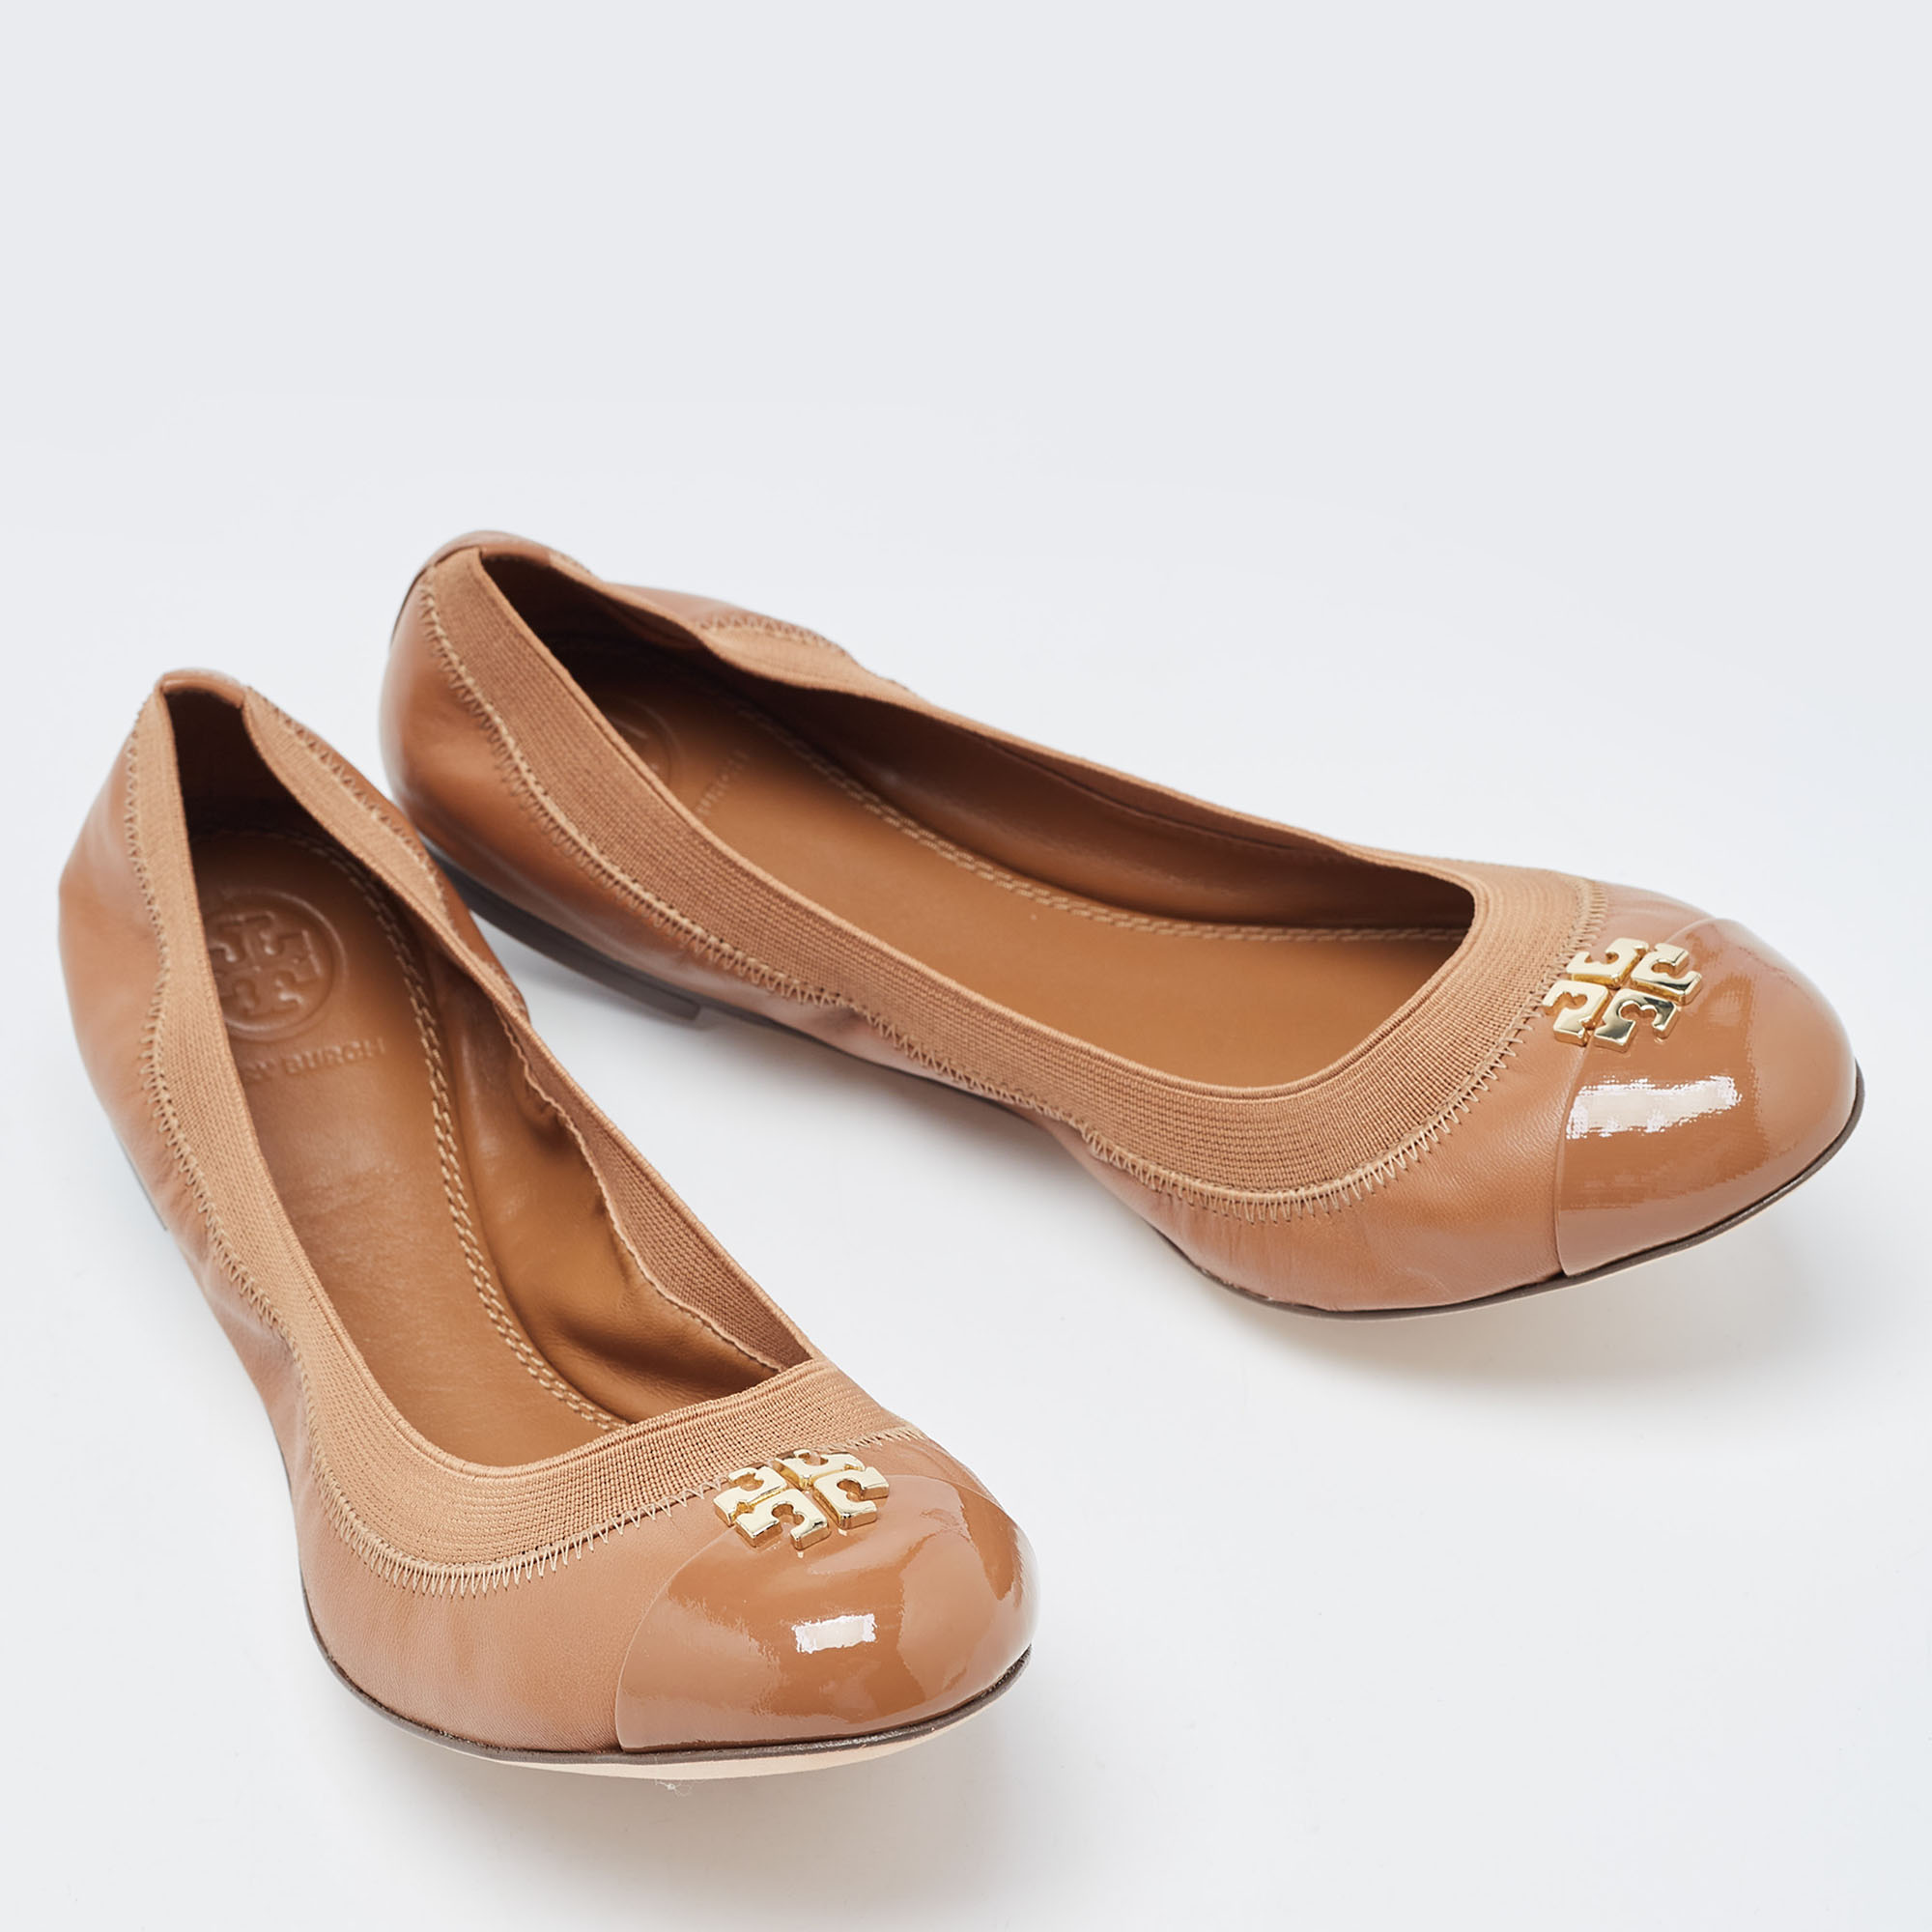 Tory Burch Brown Patent And Leather Jolie Scrunch Ballet Flats Size 39.5